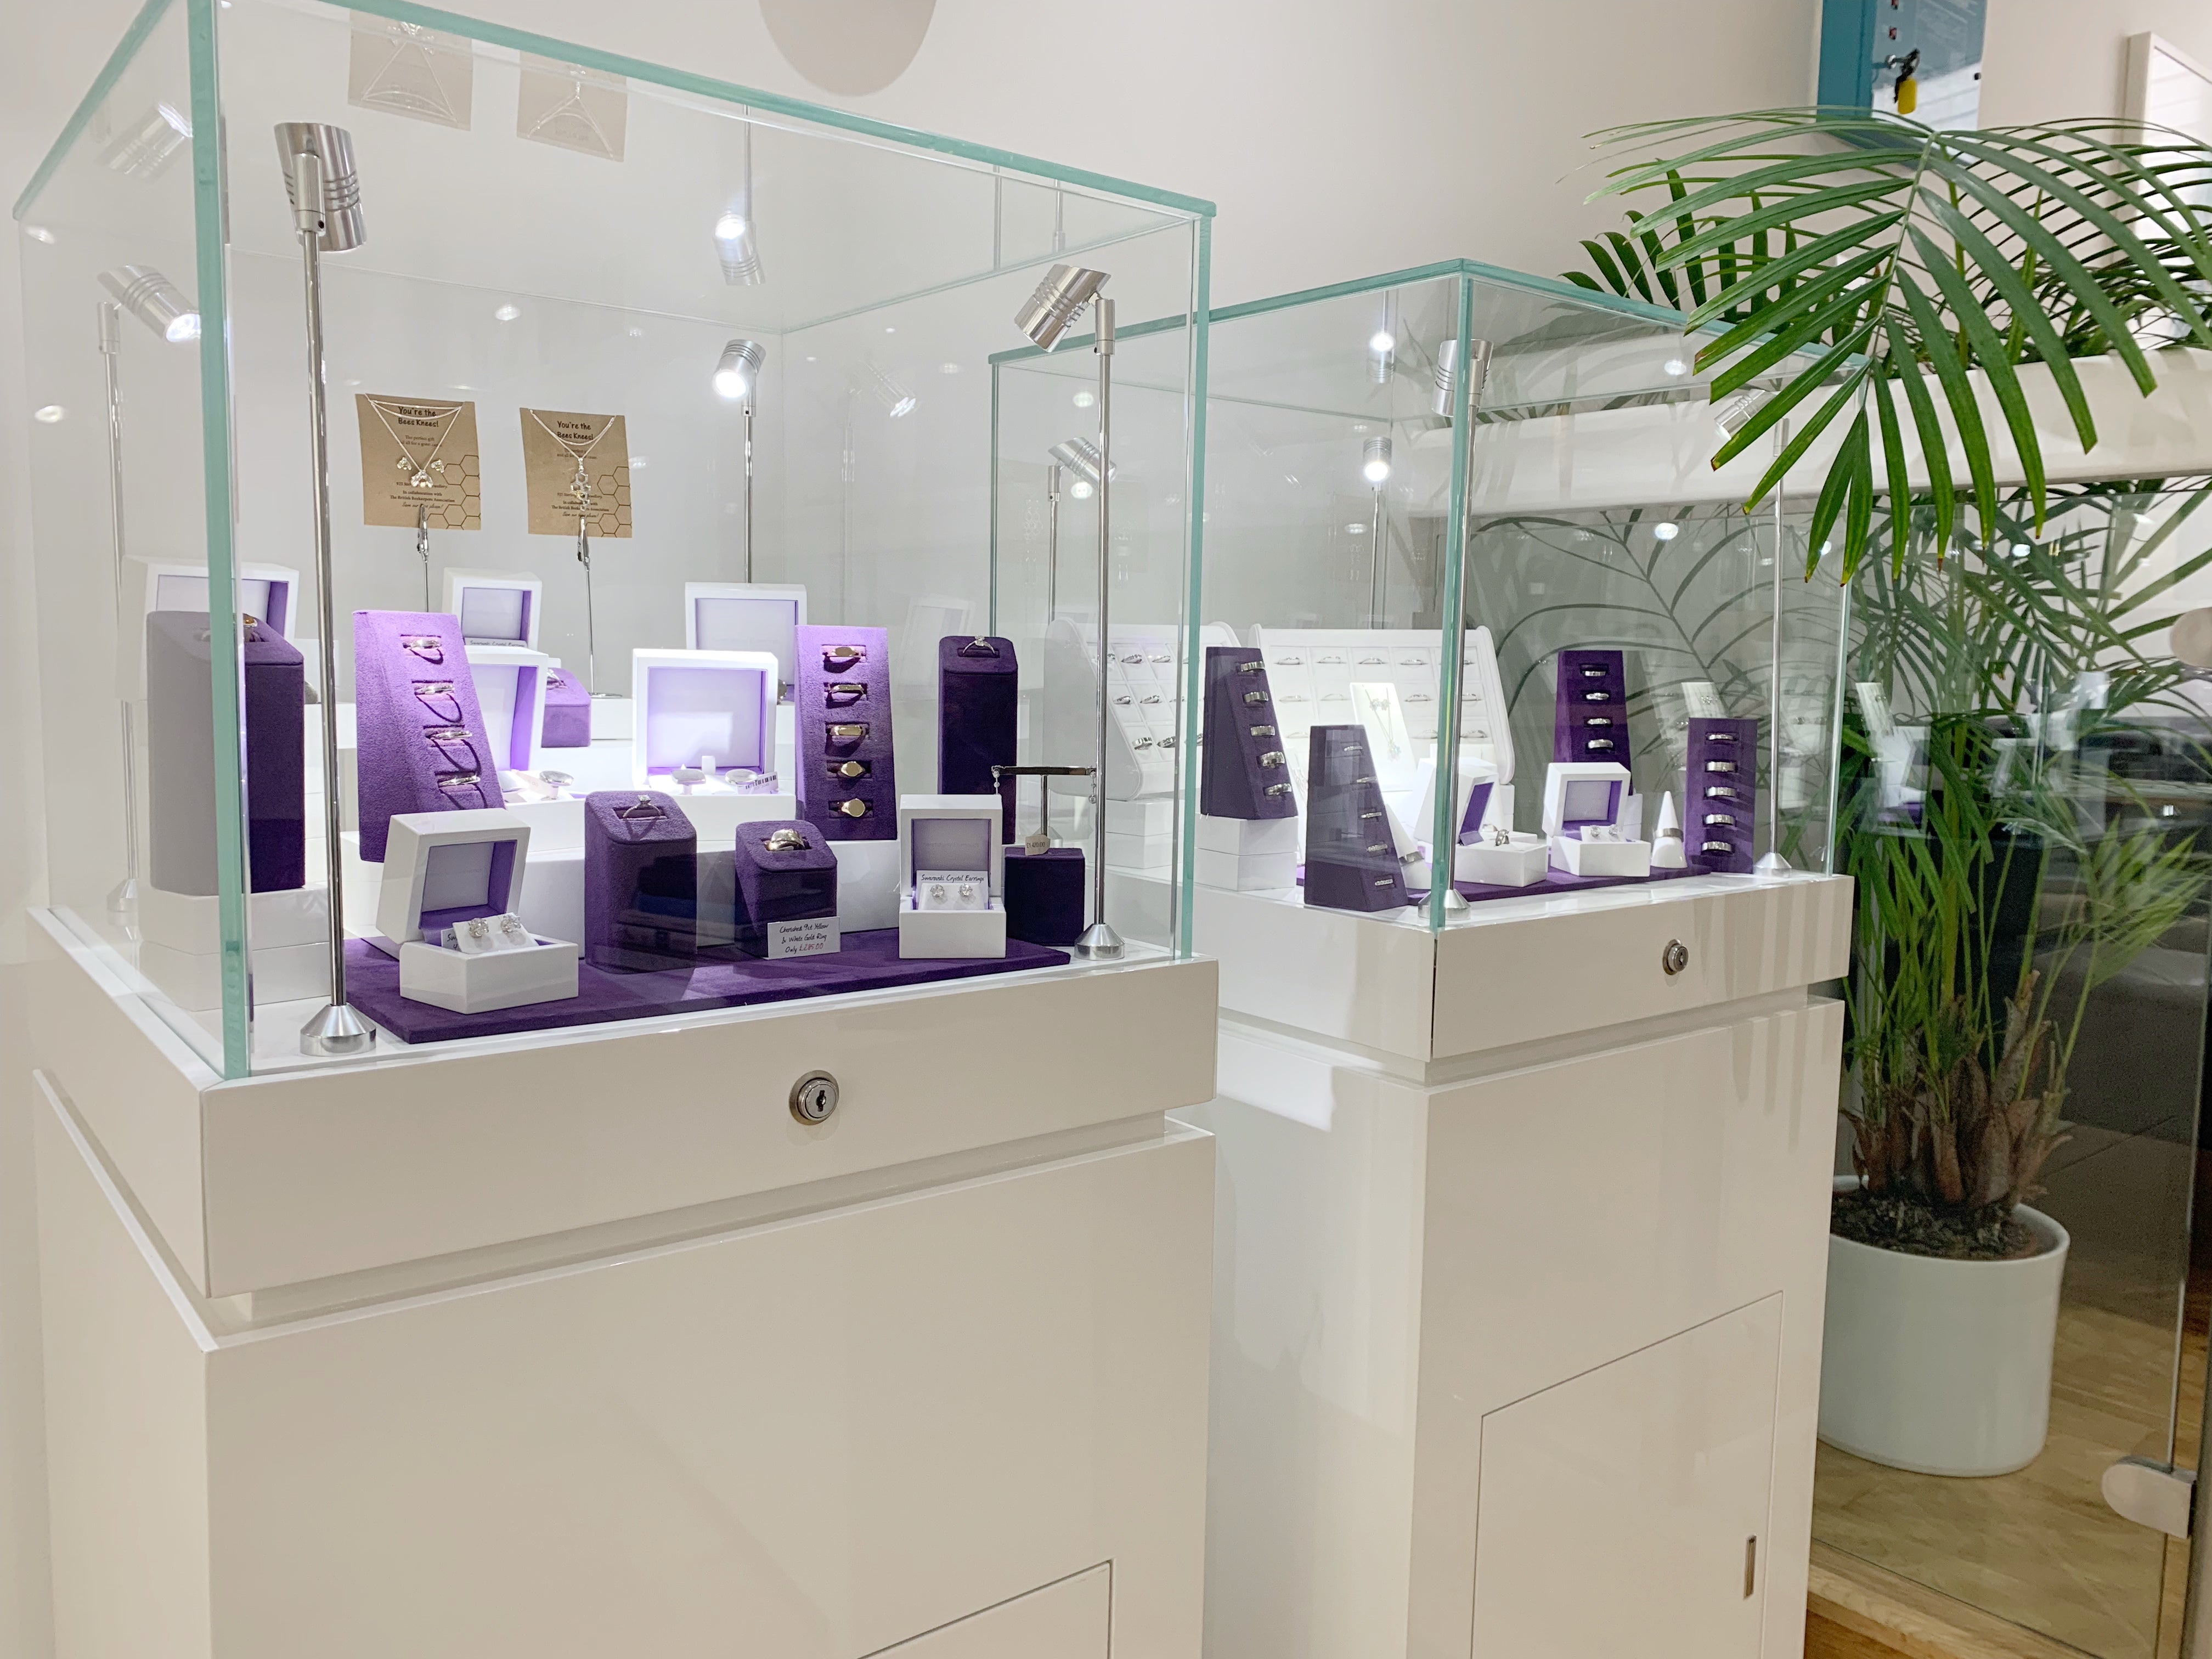 Visit the Serendipity boutique jewellery showroom in Ryde